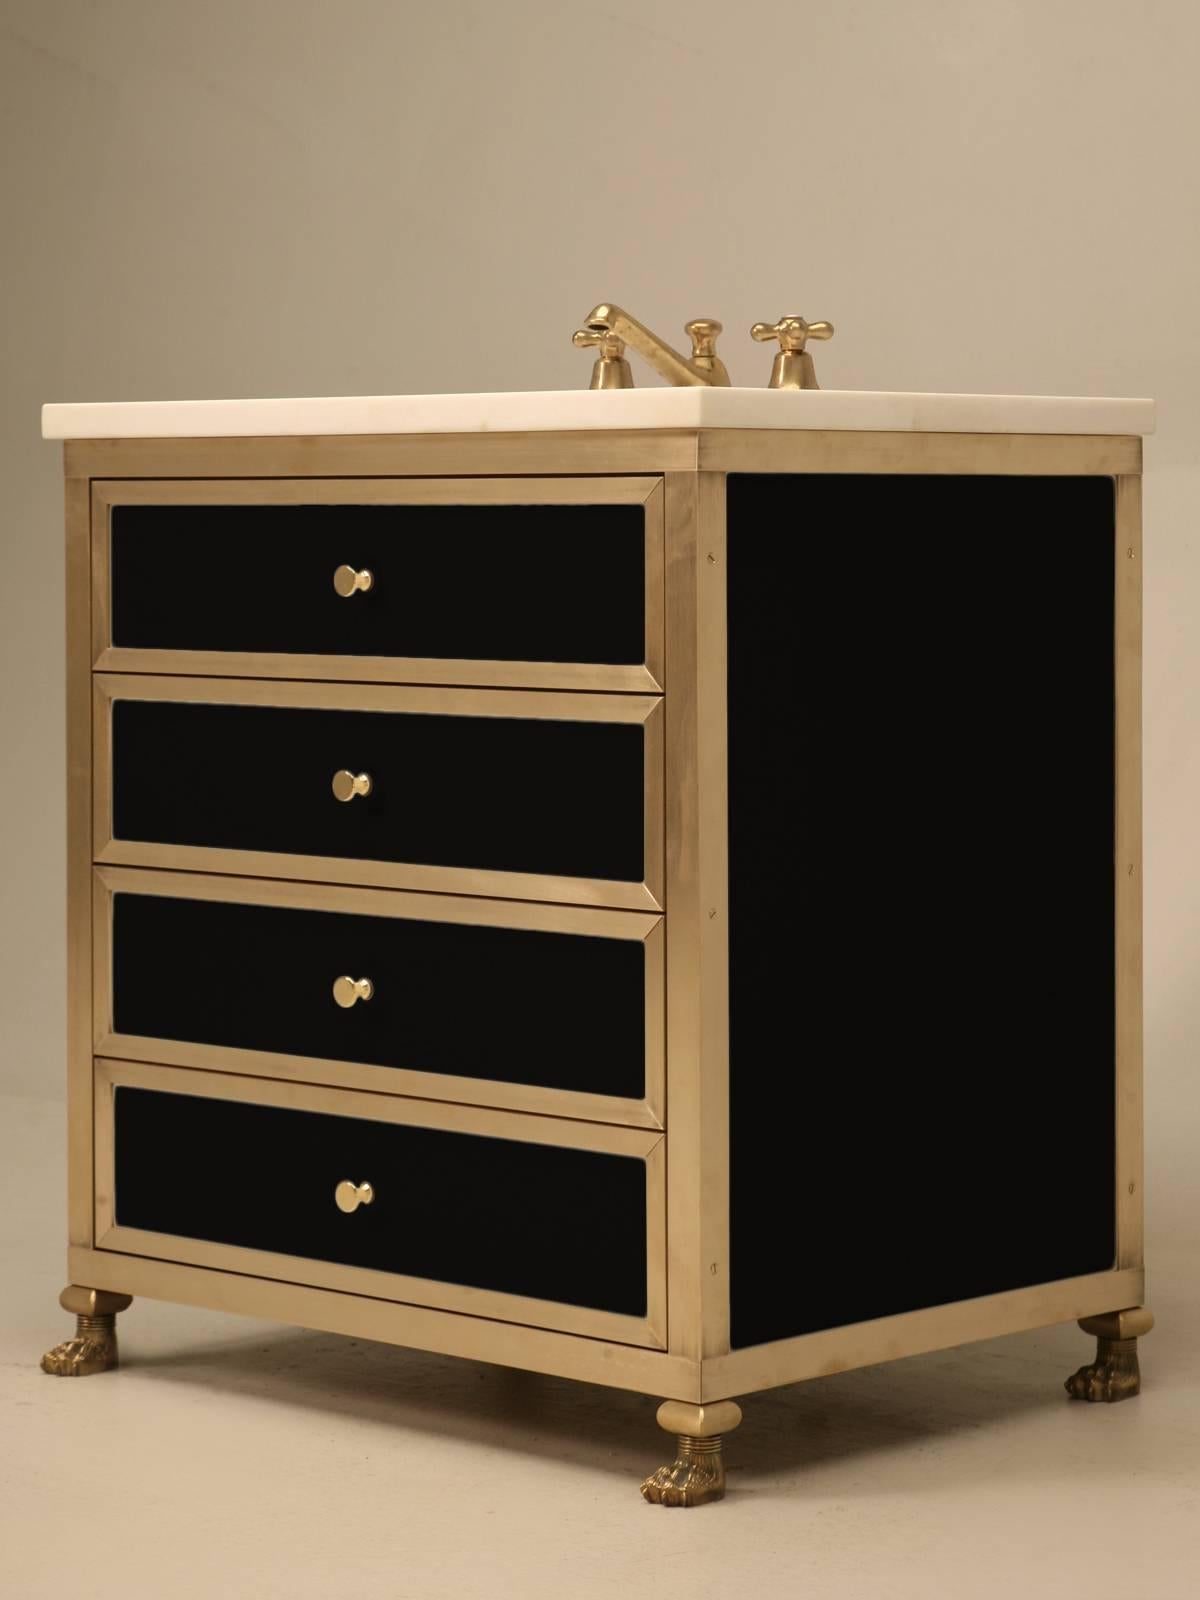 An Old Plank original, solid bronze bathroom vanity with endless choices available for the colored inserts. The vanity pictured here, was made with black glass inserts, or could as easily be produced with vitreous enamel (think kitchen stove, same